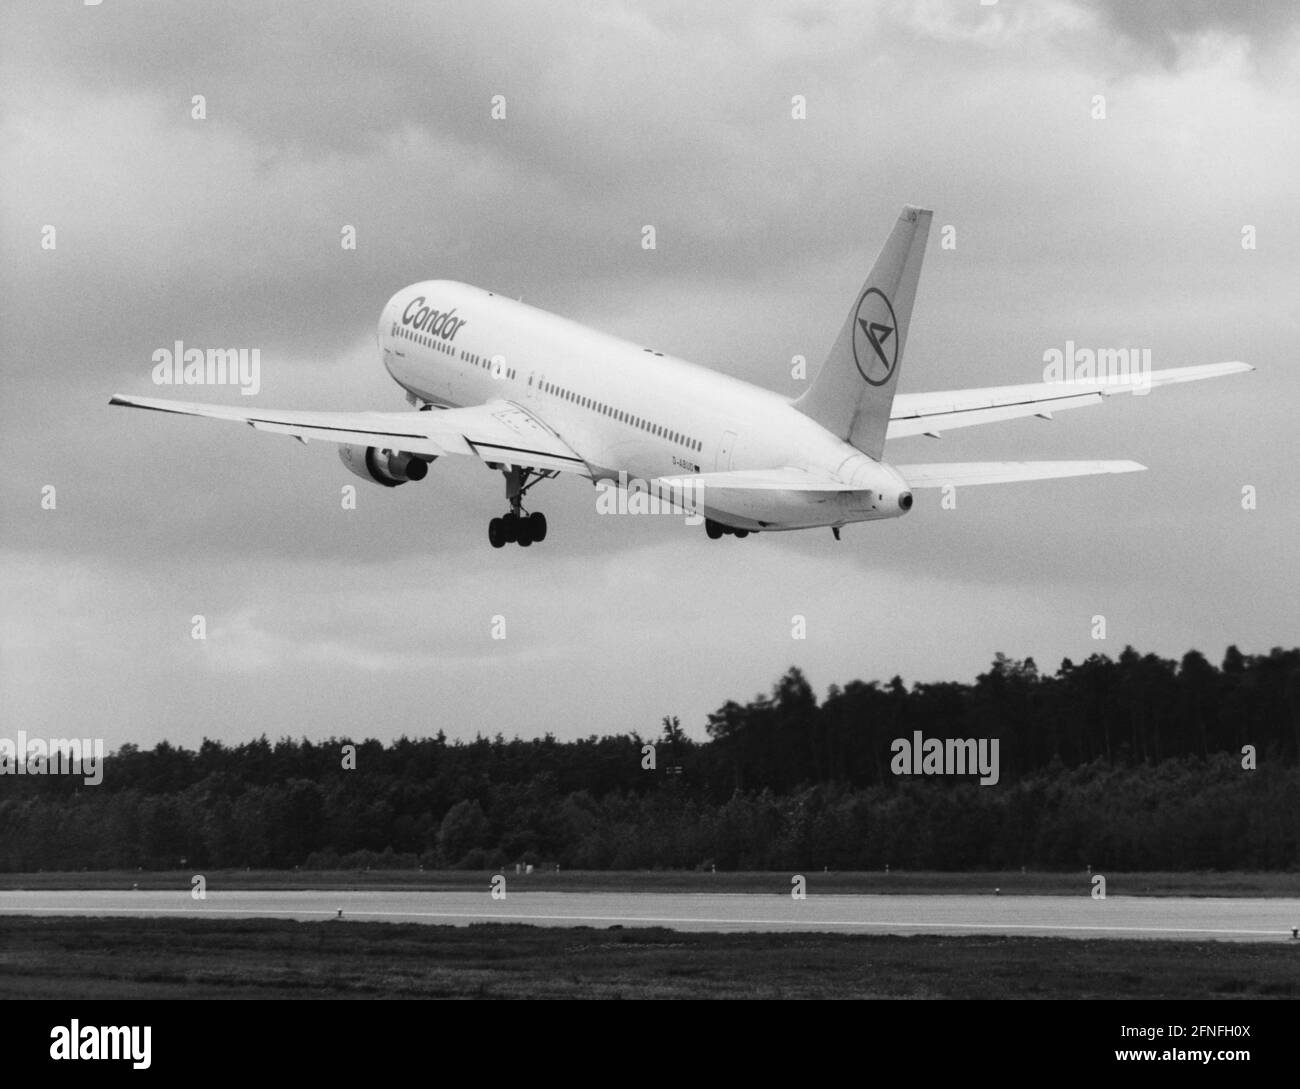 A Boeing 767-300 ER (extended range) with the registration D-ABUD of the German airline Condor shortly after take-off. [automated translation] Stock Photo